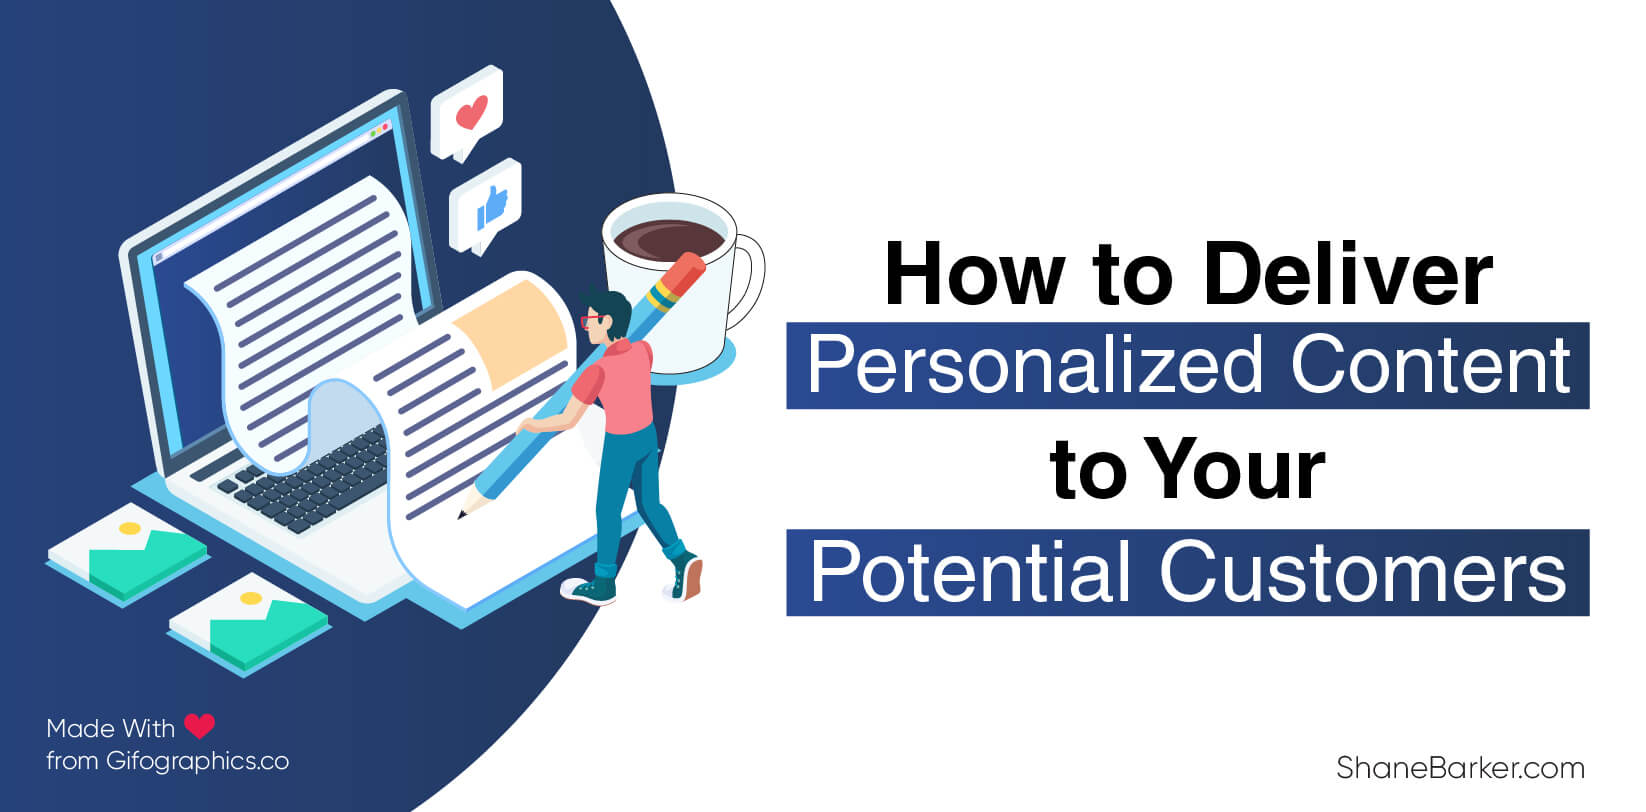 how to deliver personalized content to your potential customers (updated september 2019)